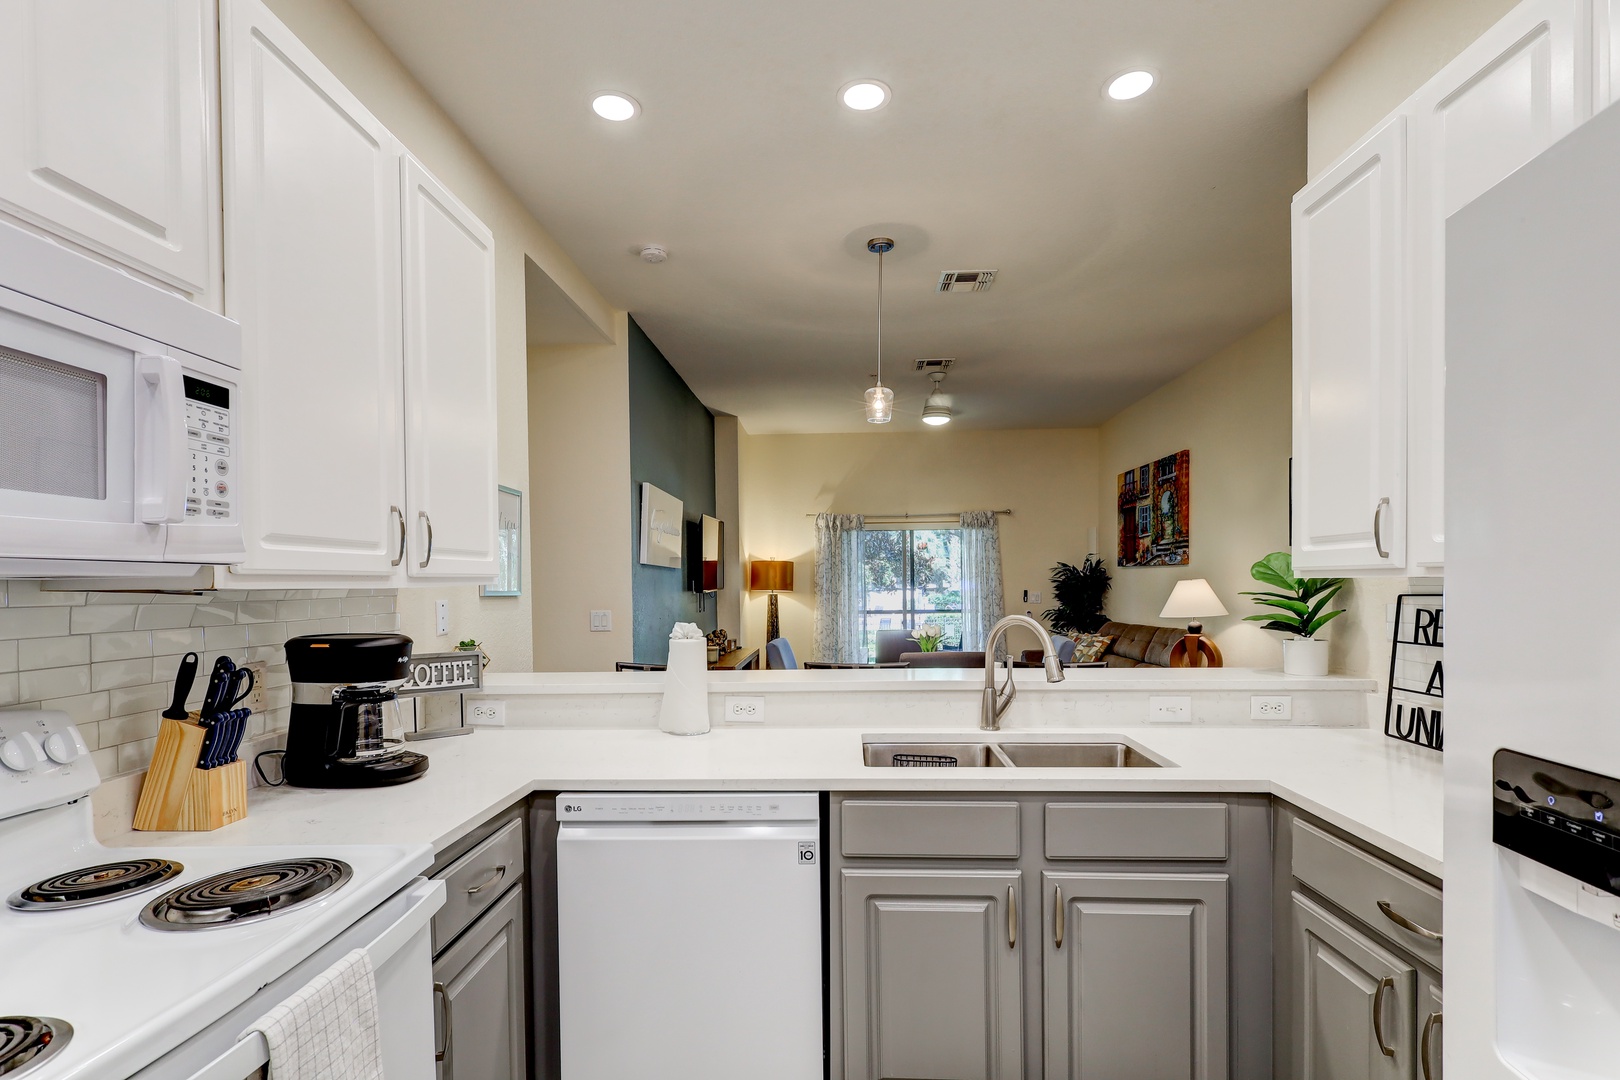 The sleek, open kitchen is well equipped with all the comforts of home